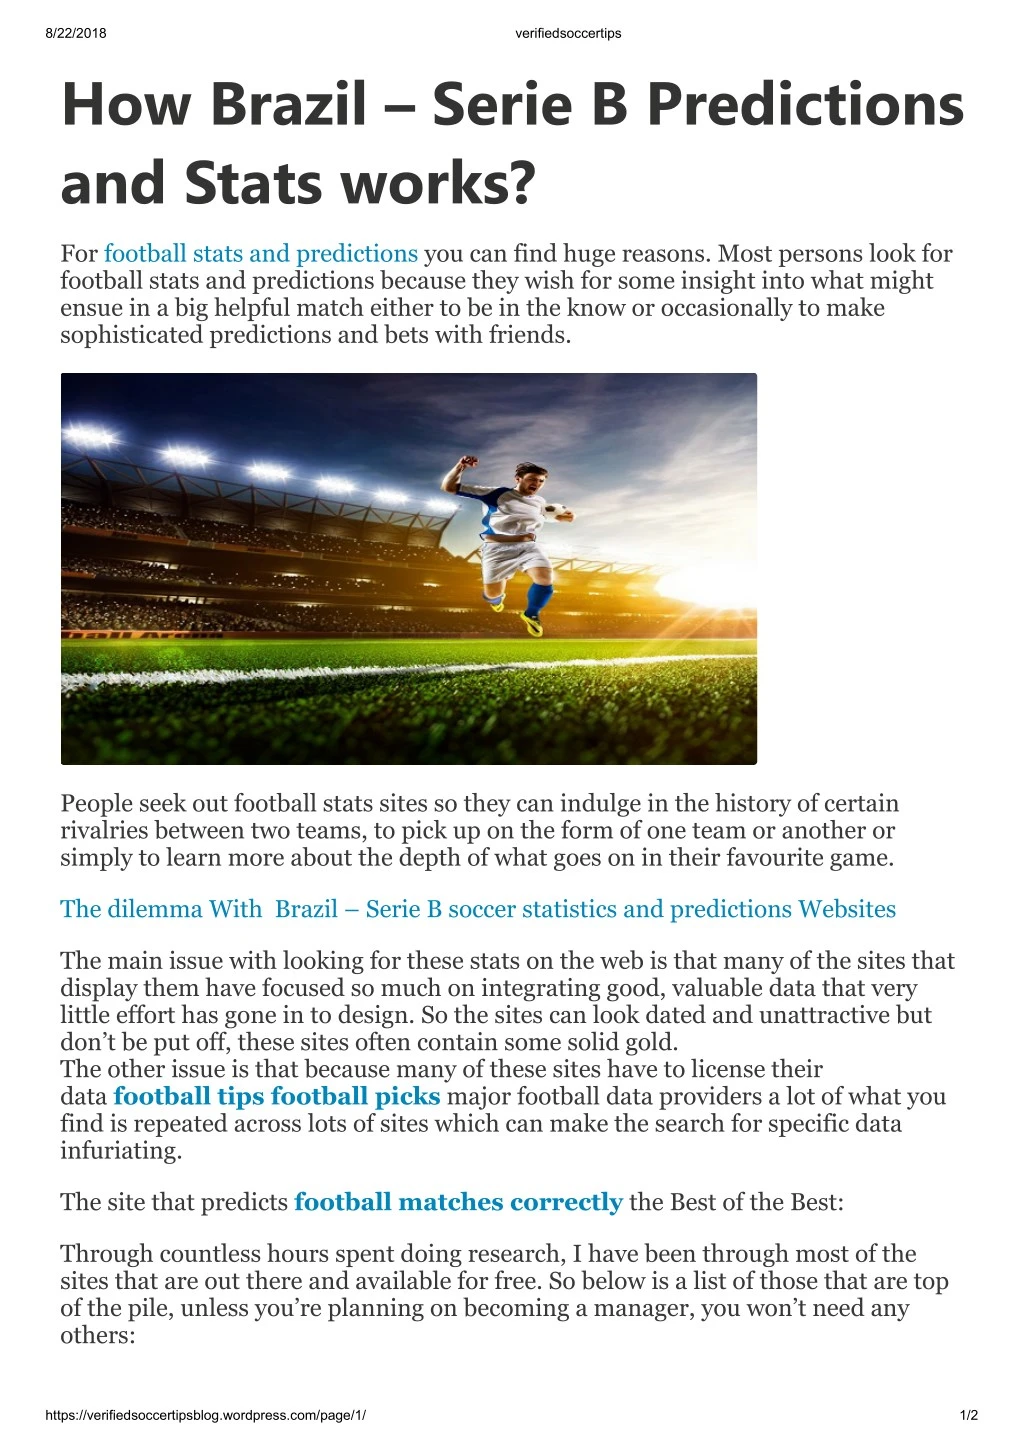 Ppt How Brazil A Serie B Predictions And Stats Works Powerpoint Presentation Id